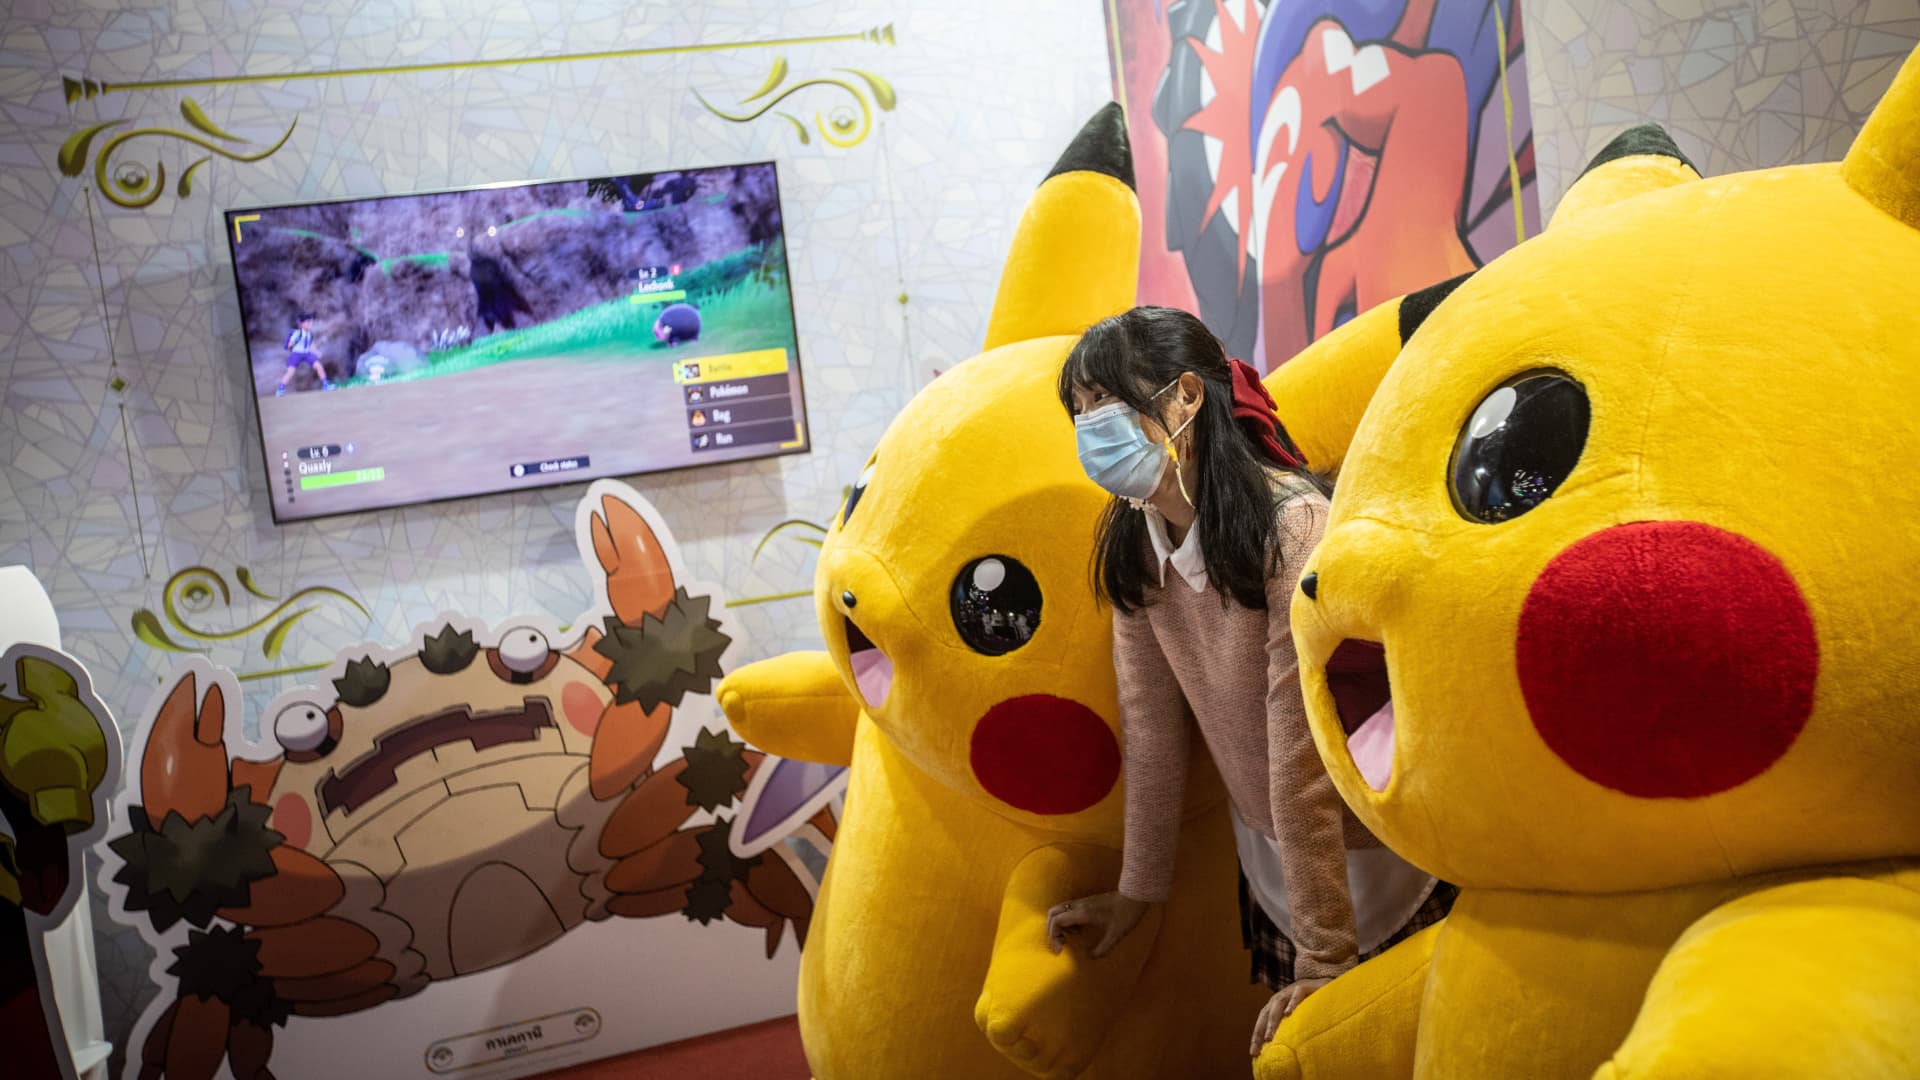 Nintendo sets sales record with new Pokémon games on the Switch console – CNBC